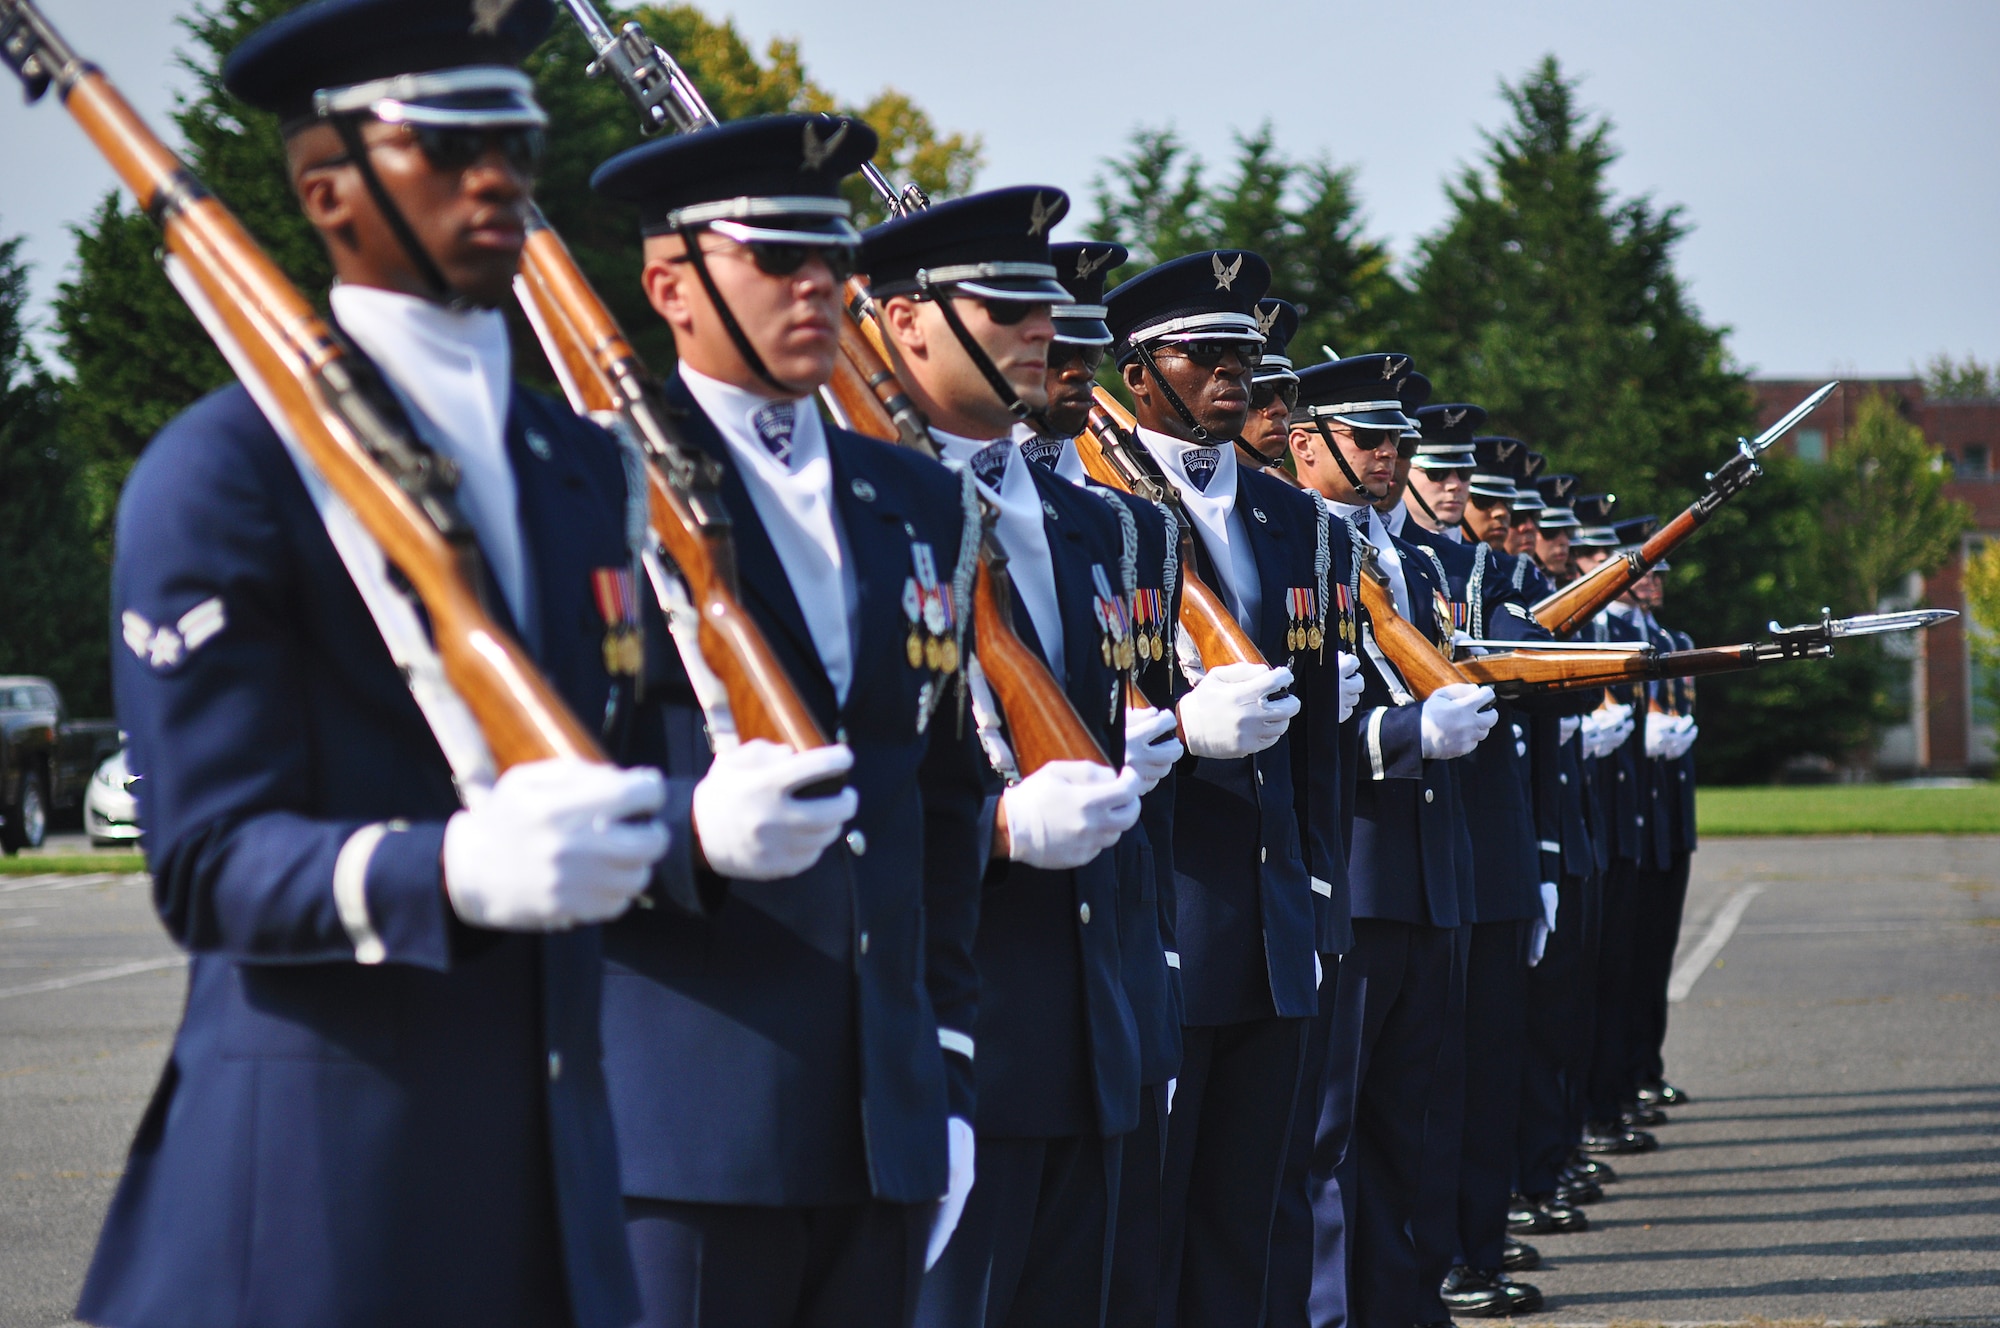 Members of the U.S. Air Force Honor Guard drill team stand in formation as they perform rapid movements with their M-1 Garand rifles, creating a wave effect down the line, Sept. 24, 2012, at Joint Base Lewis-McChord, Wash. The team stopped at JBLM on their tour around the country and performed many demonstrations around the area. (U.S. Air Force photo/Staff Sgt. Sean Tobin)